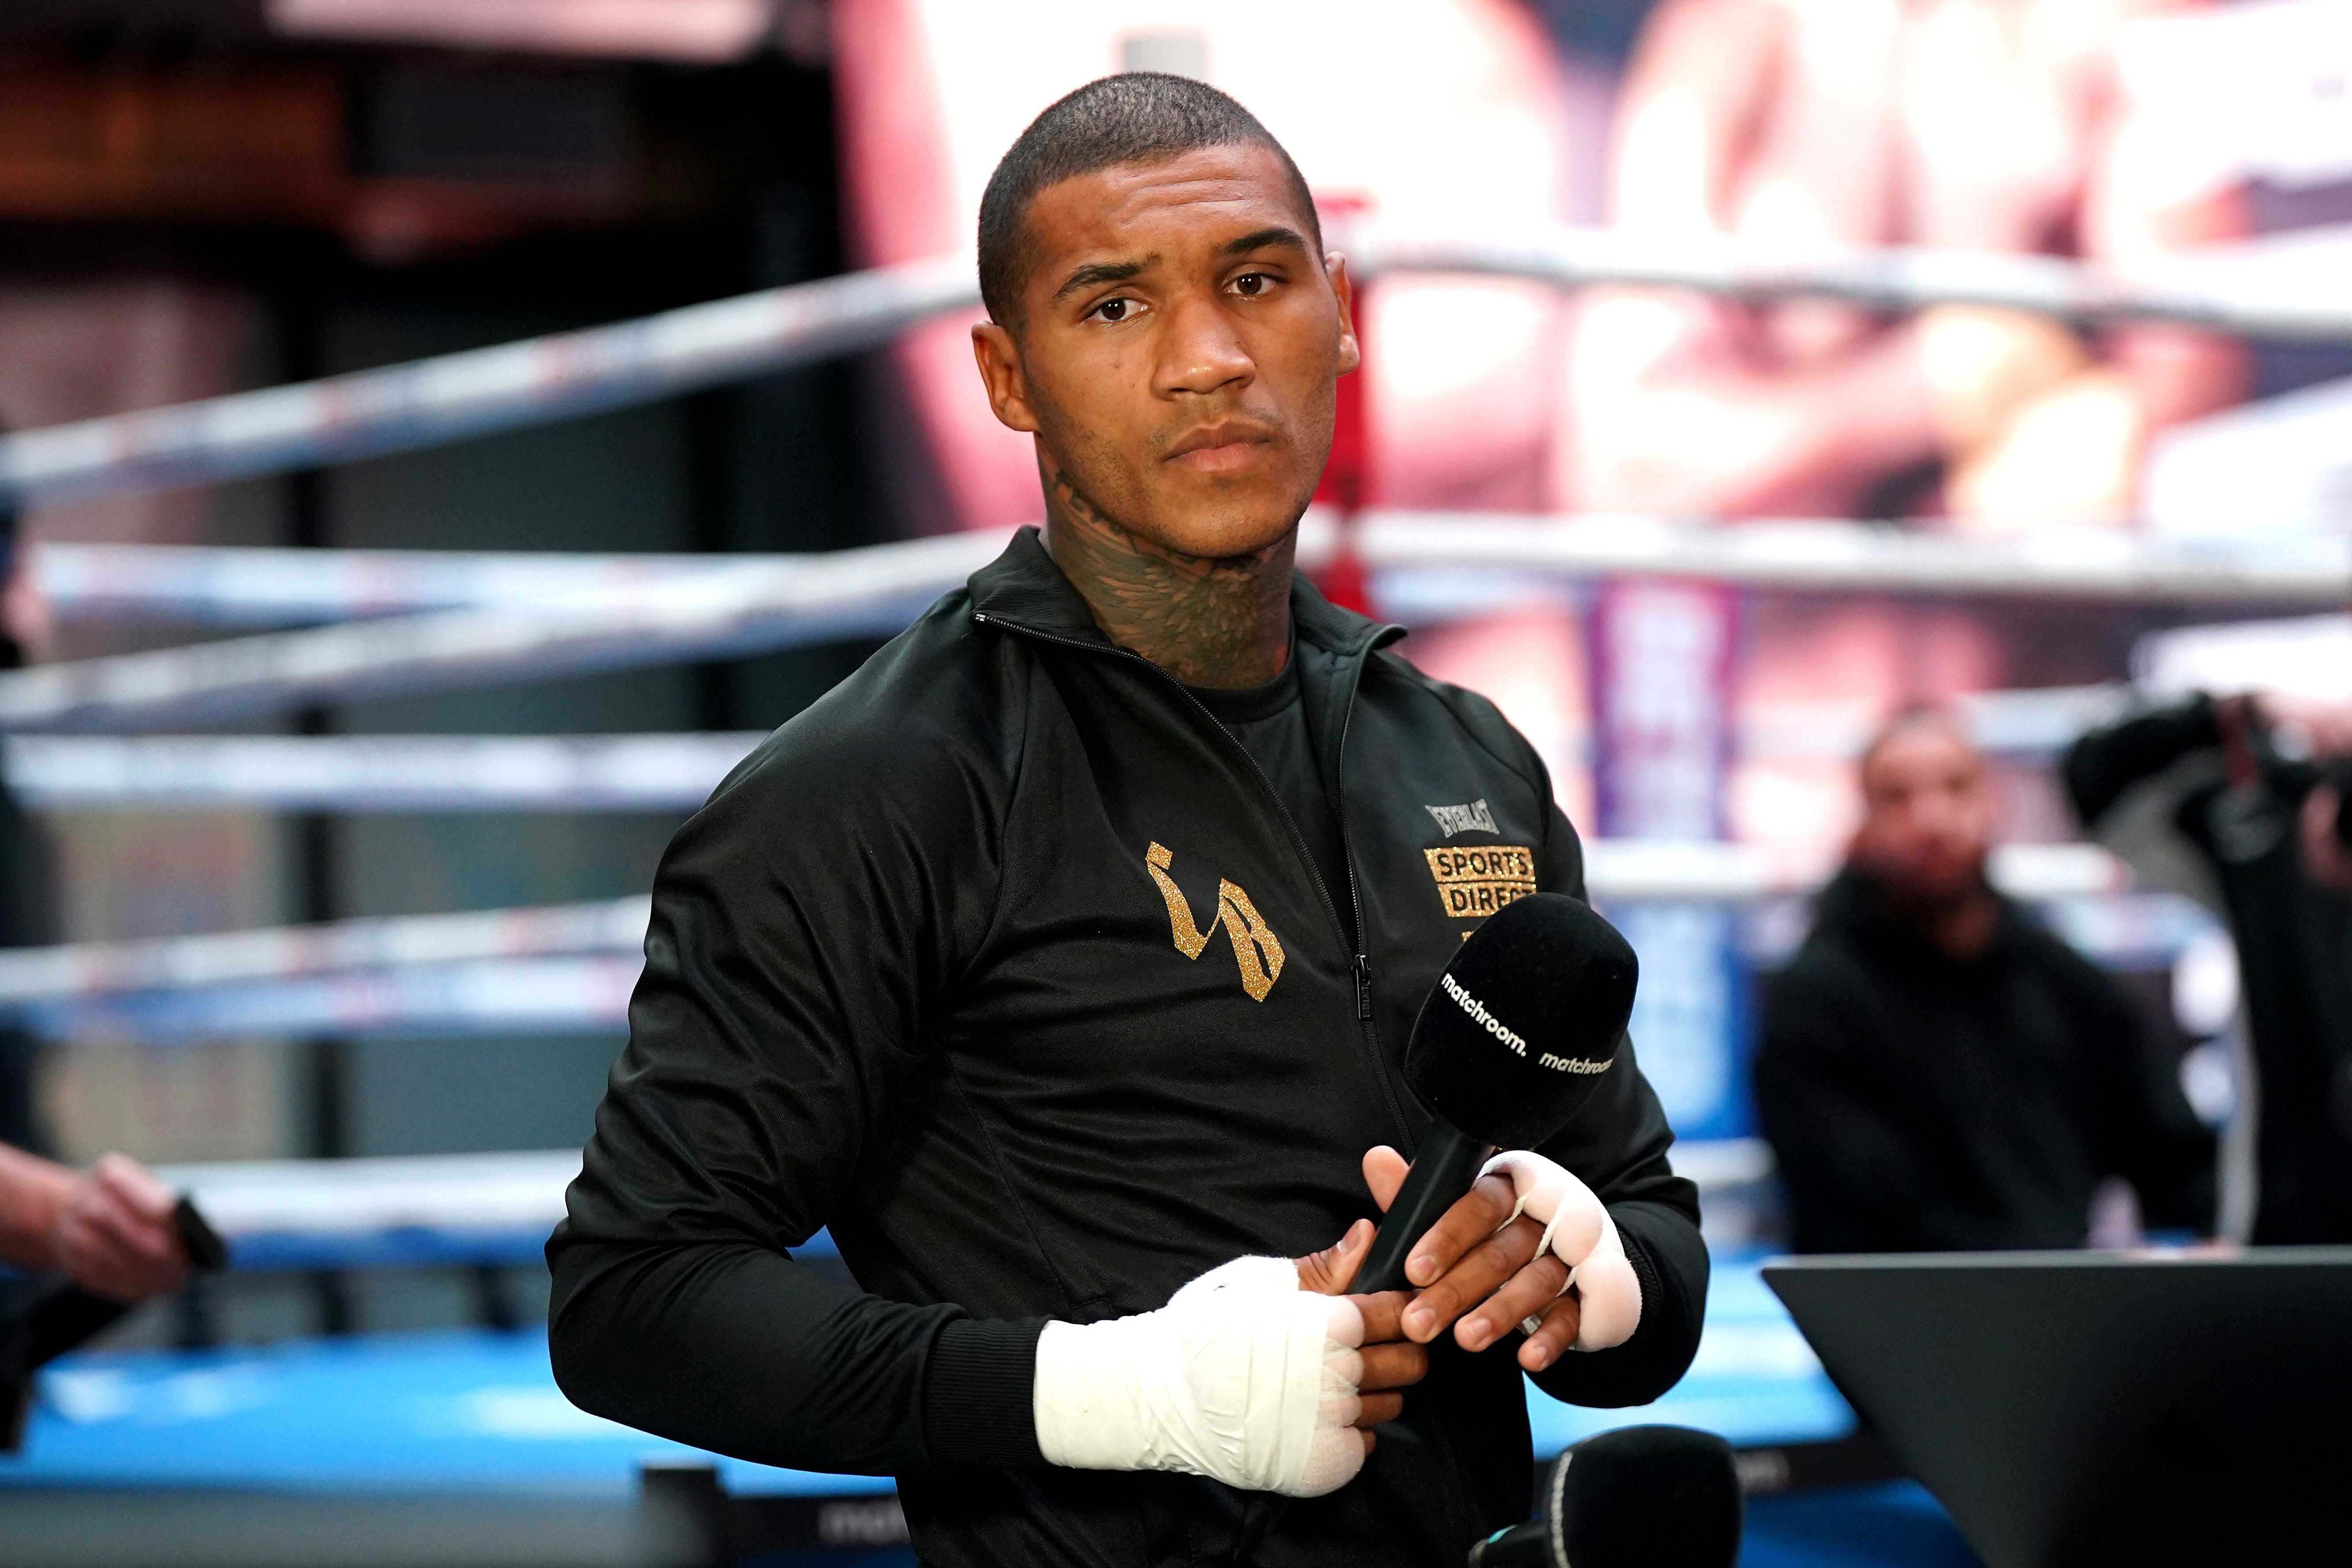 Conor Benn CLEARED to fight after two failed drugs tests before cancelled  Chris Eubank Jr fight